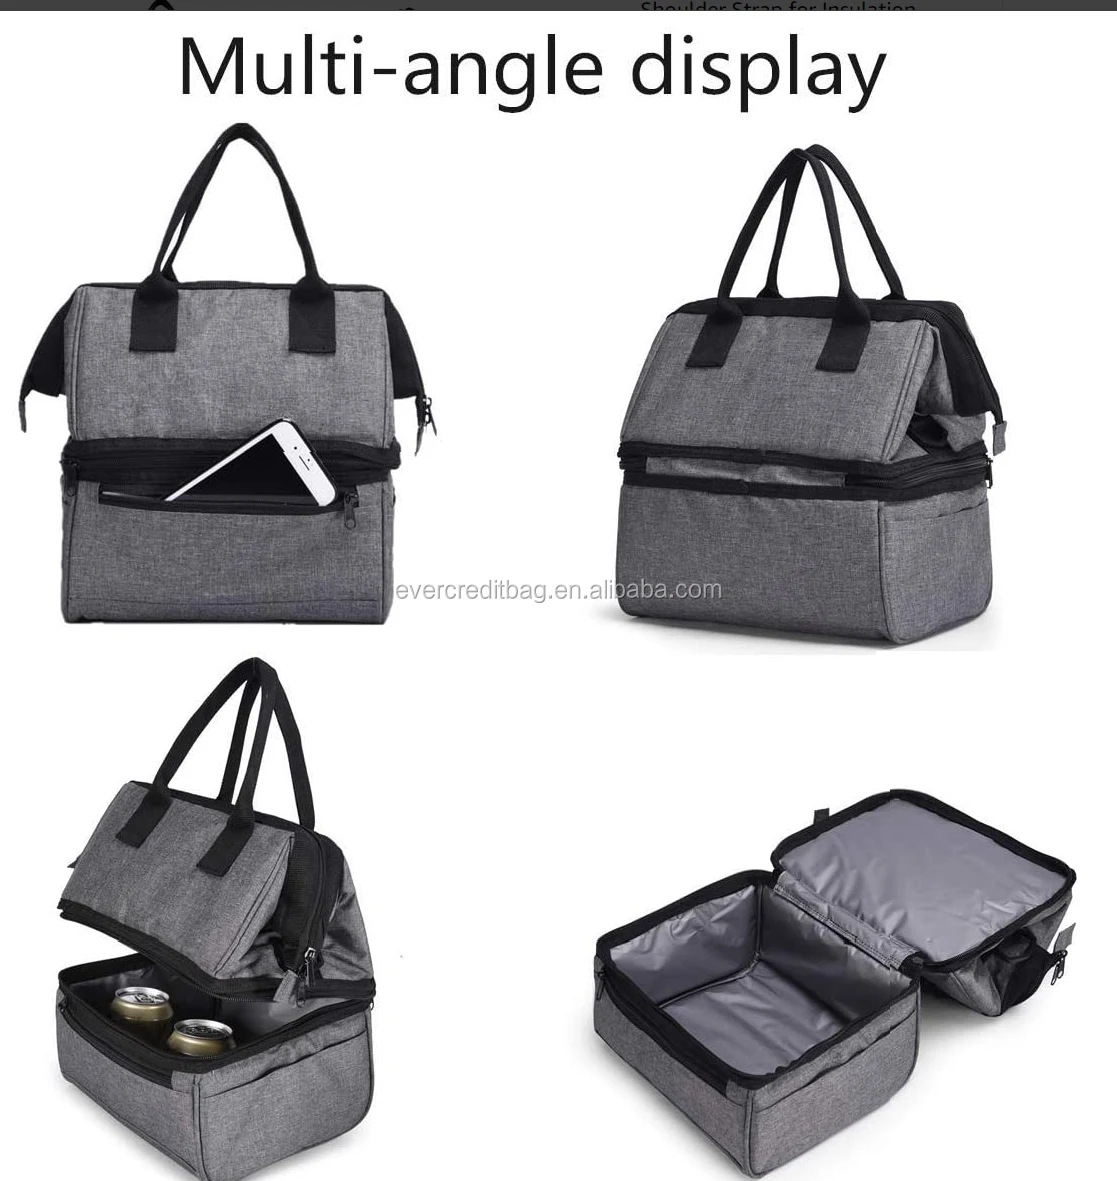 multi-compartment Lunch Bag  with double layer  for Picnic/Vacation/Camping